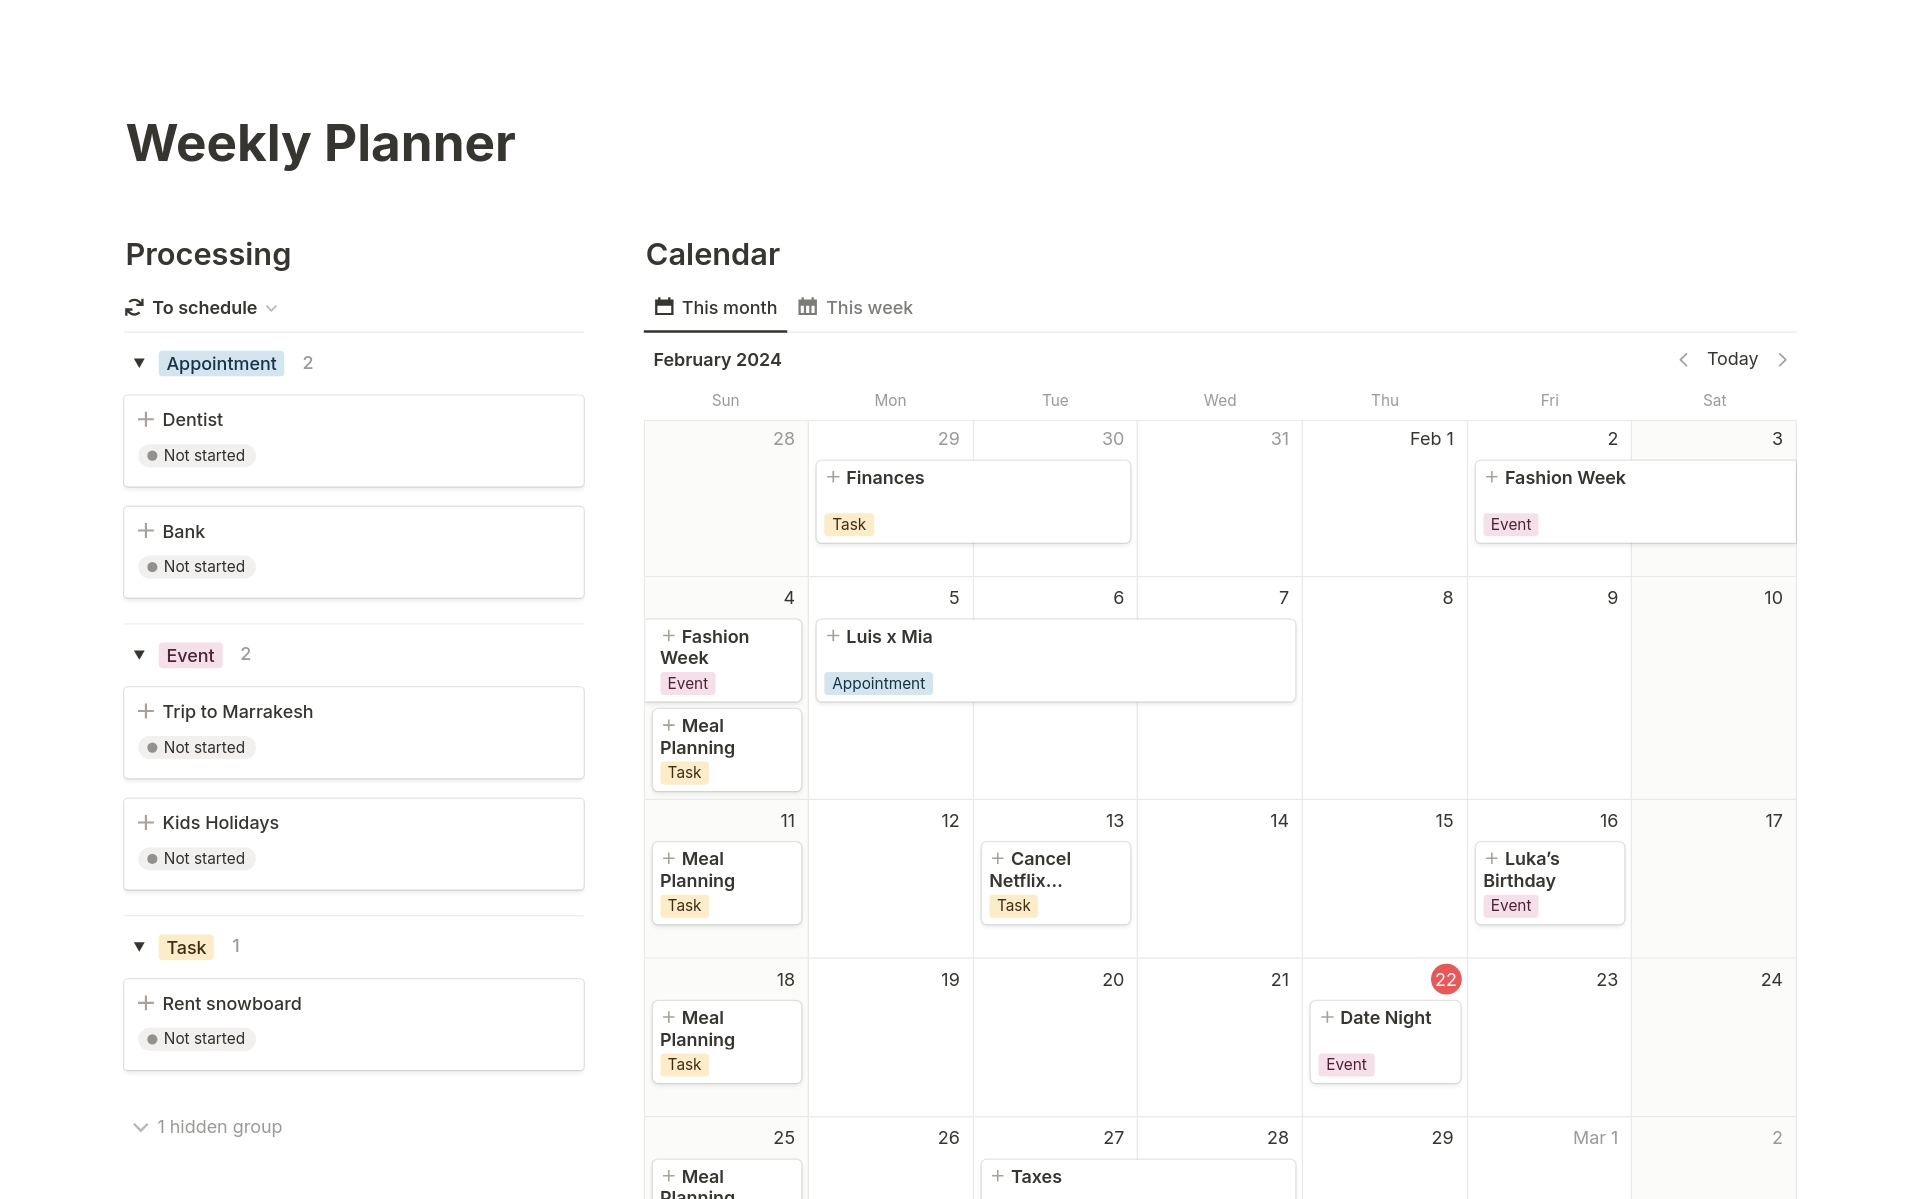 Organise you days, weeks, months and see your events in Notion Calendar